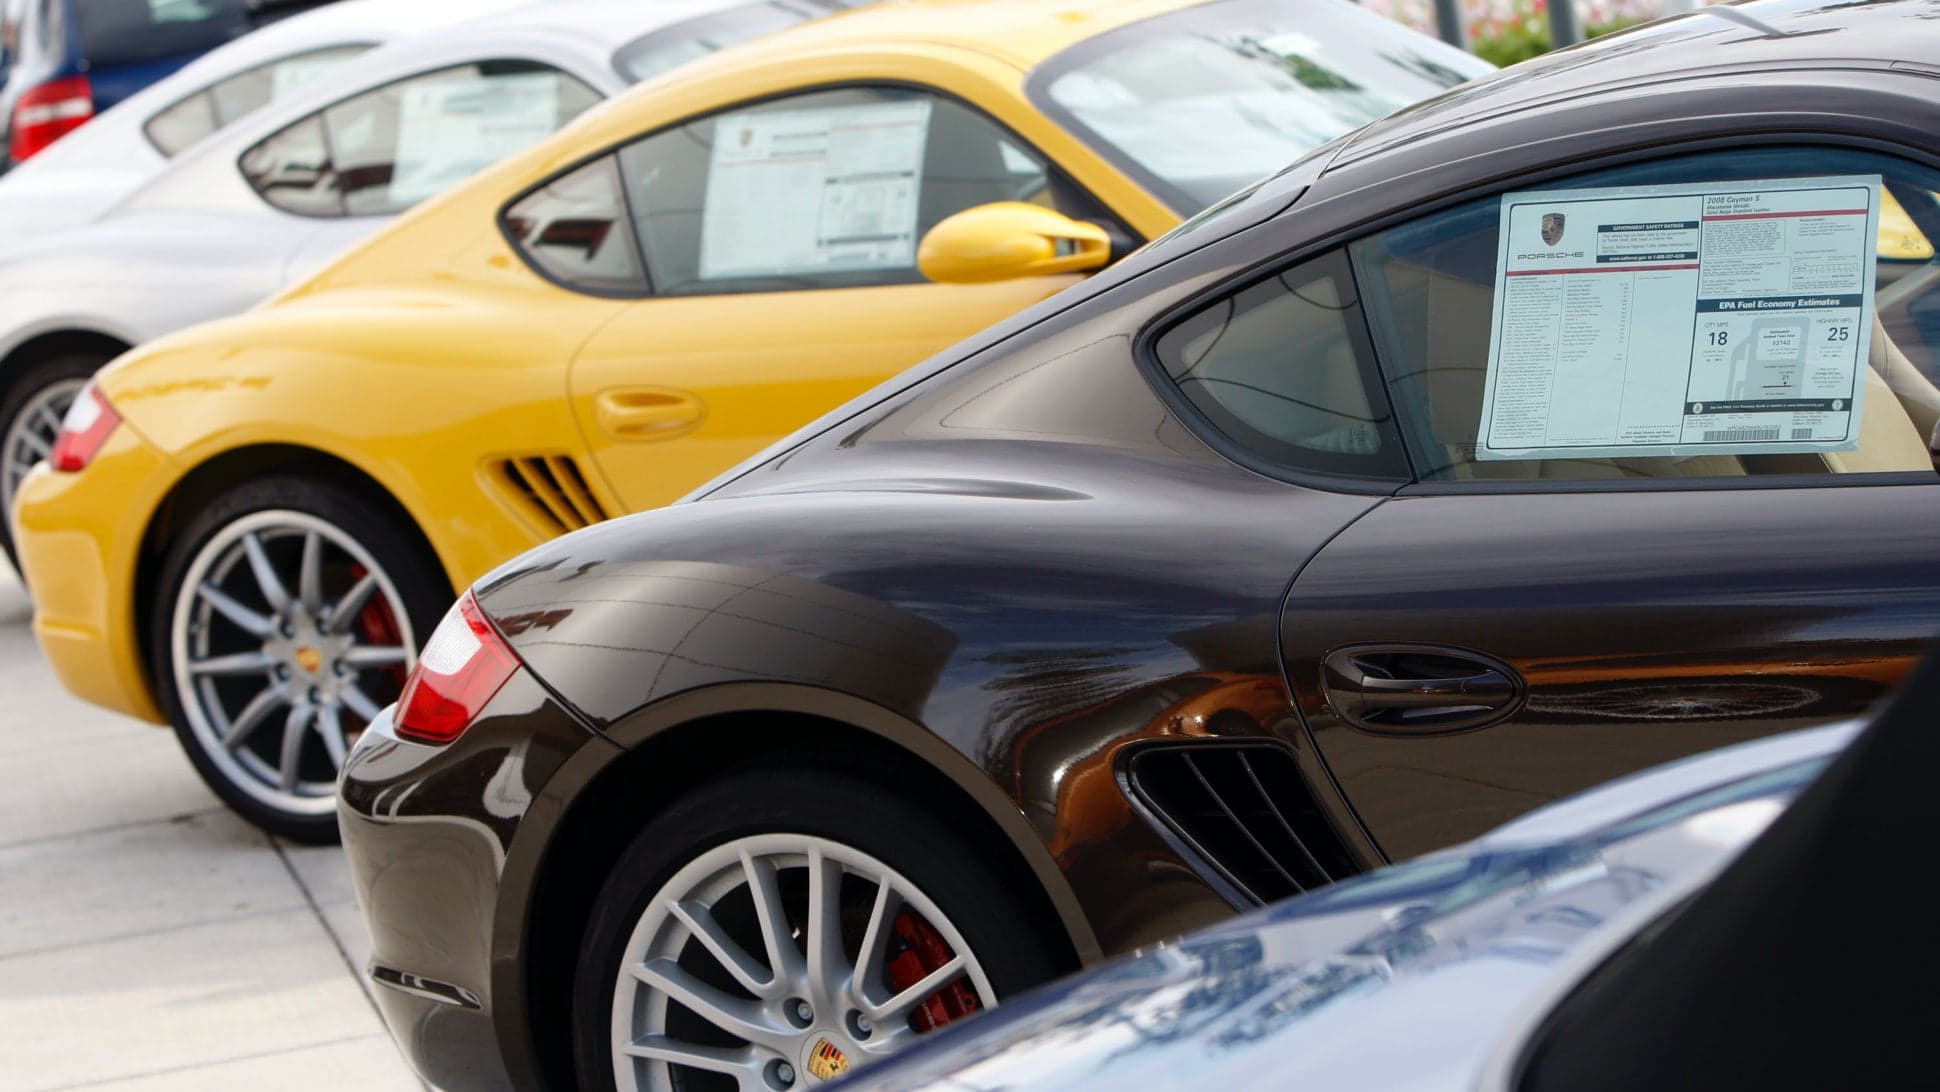 Porsche’s New Nationwide Used Car Search Is a Gift to Fans Everywhere